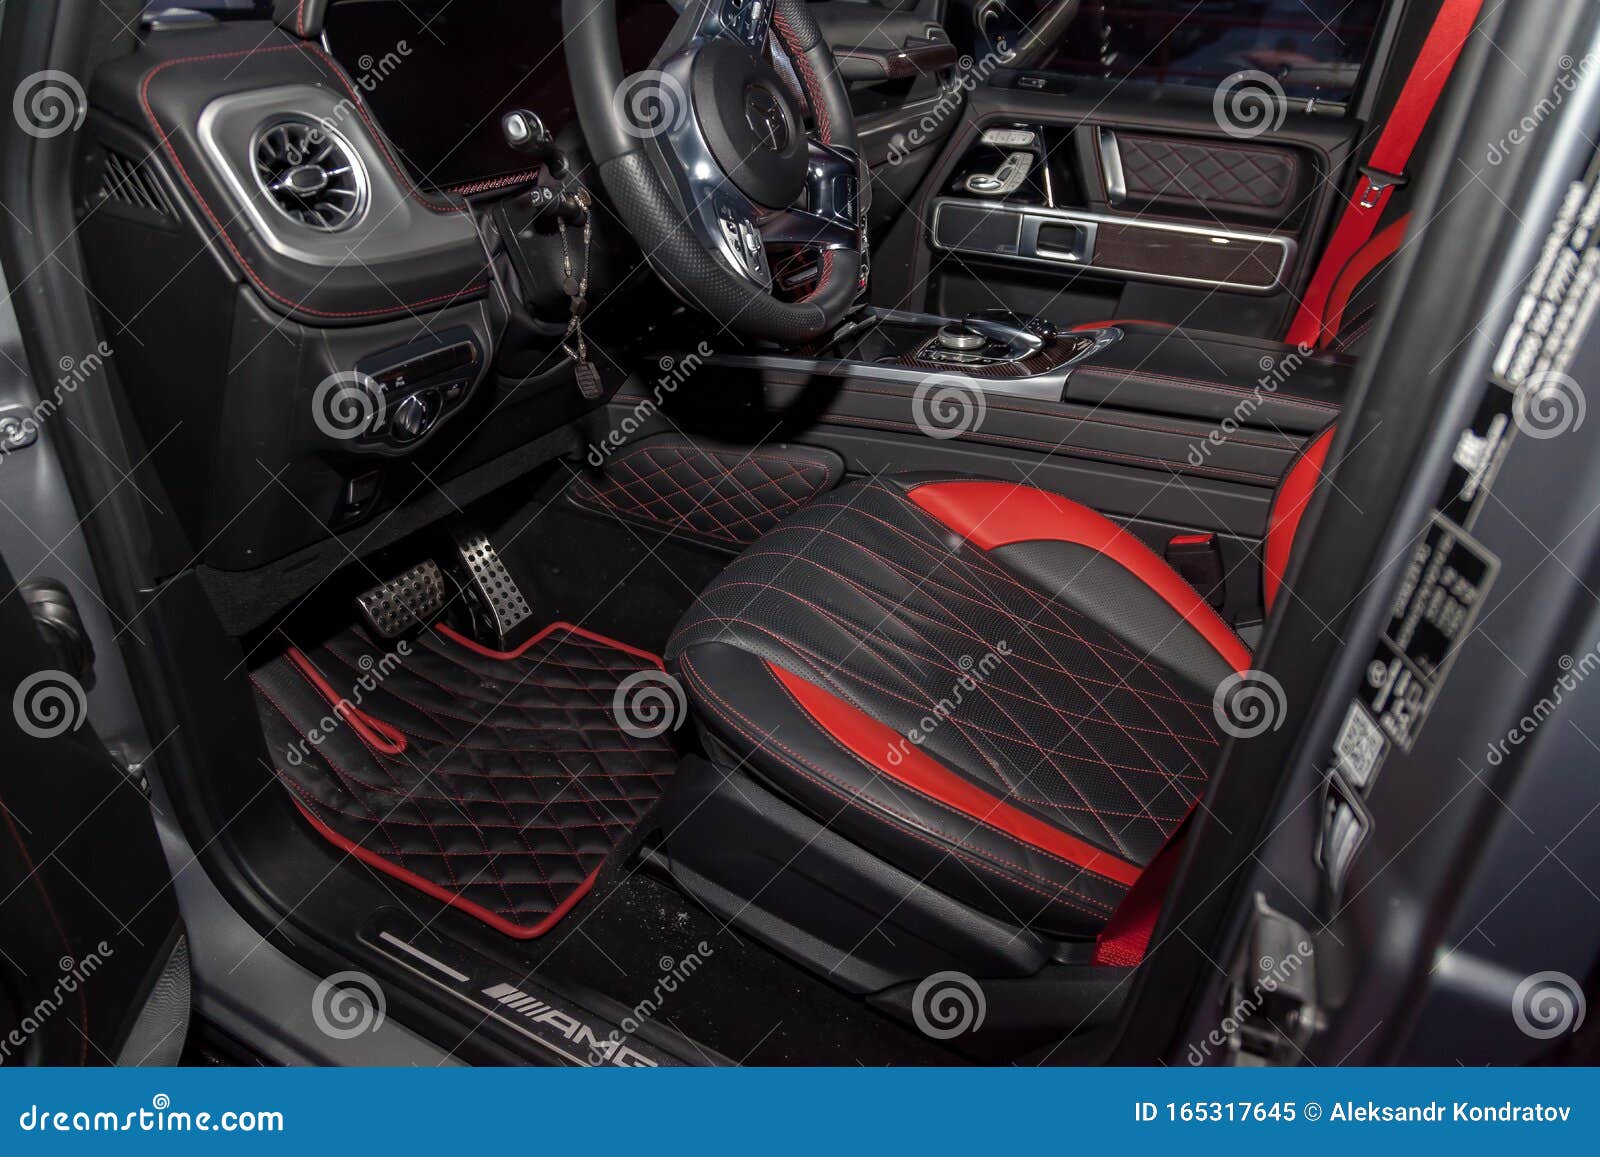 The Interior Of The Car Mercedes Benz G Class G350 With A View Of The Steering Wheel Dashboard Seats And Multimedia With Black Editorial Image Image Of Fast Industrial